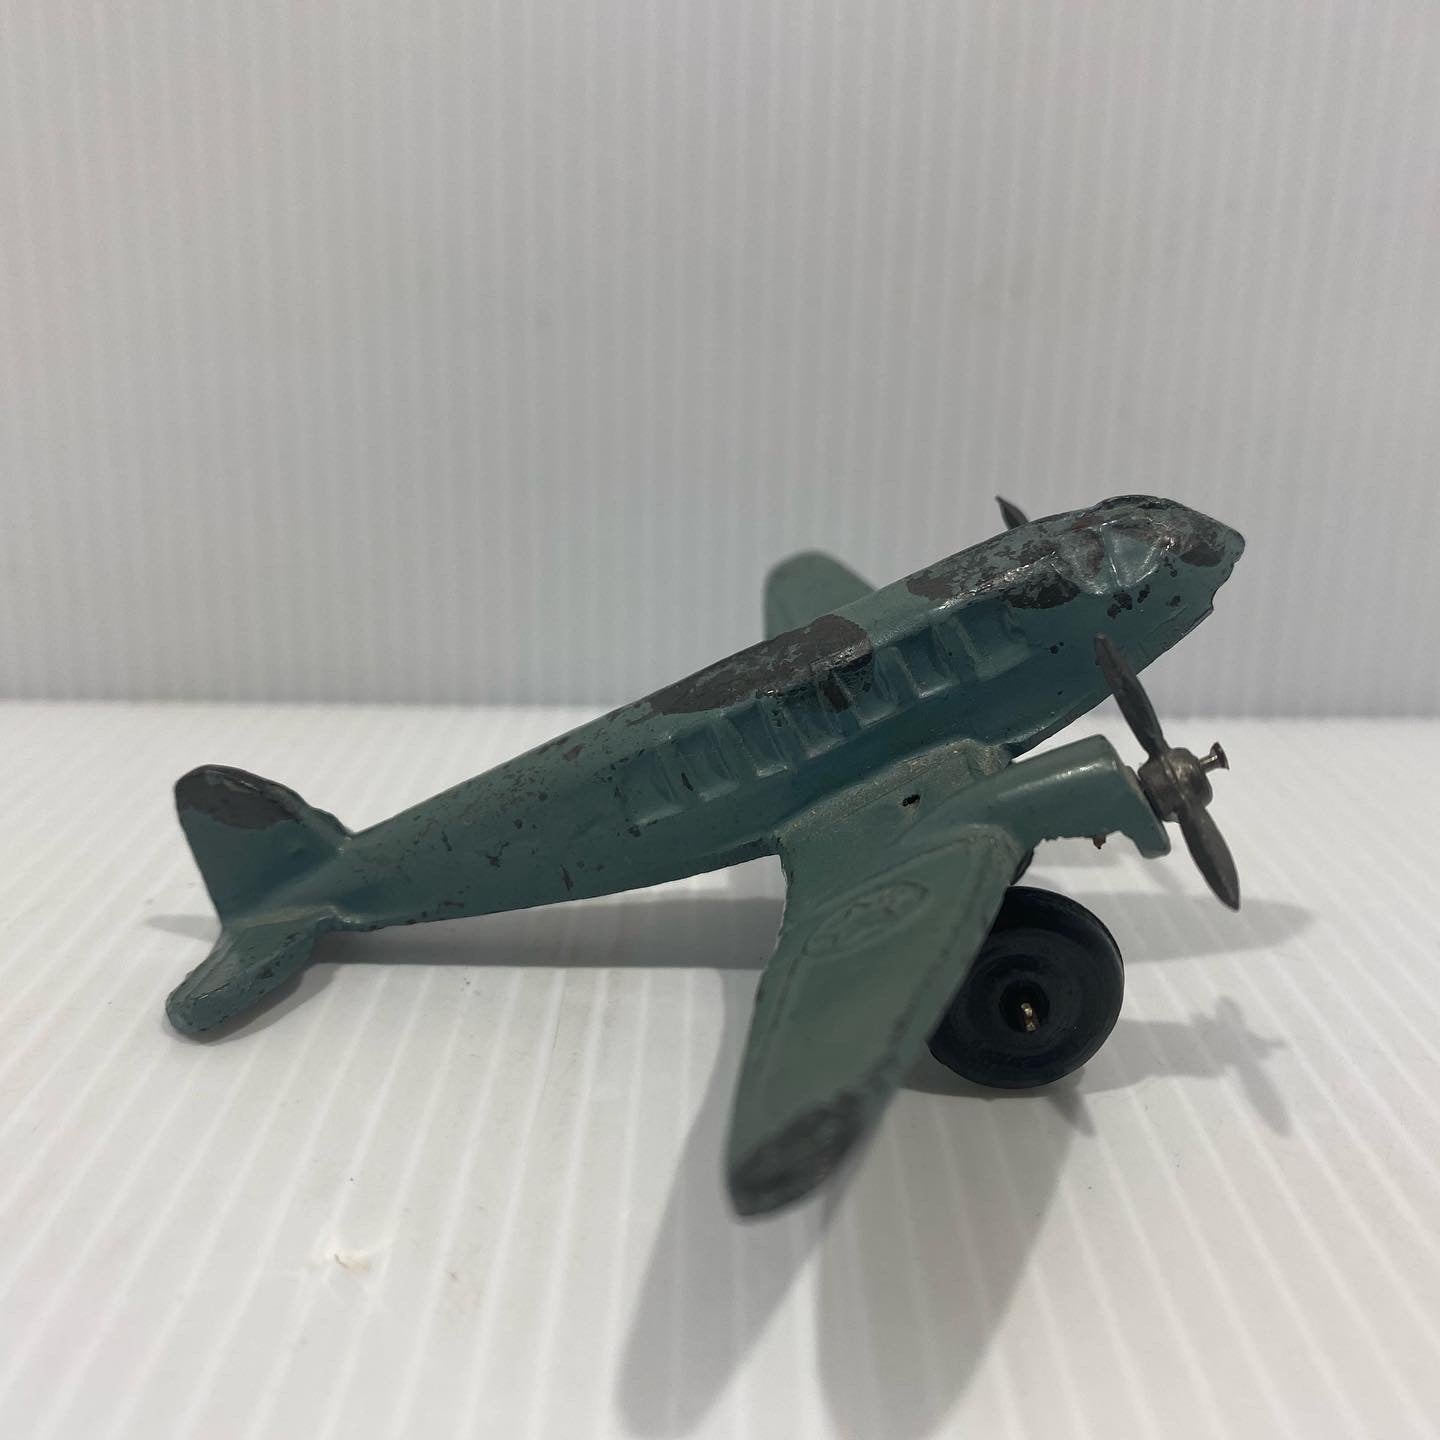 Vintage United Boeing Cast Iron Airplane made in mexico in the 50s.